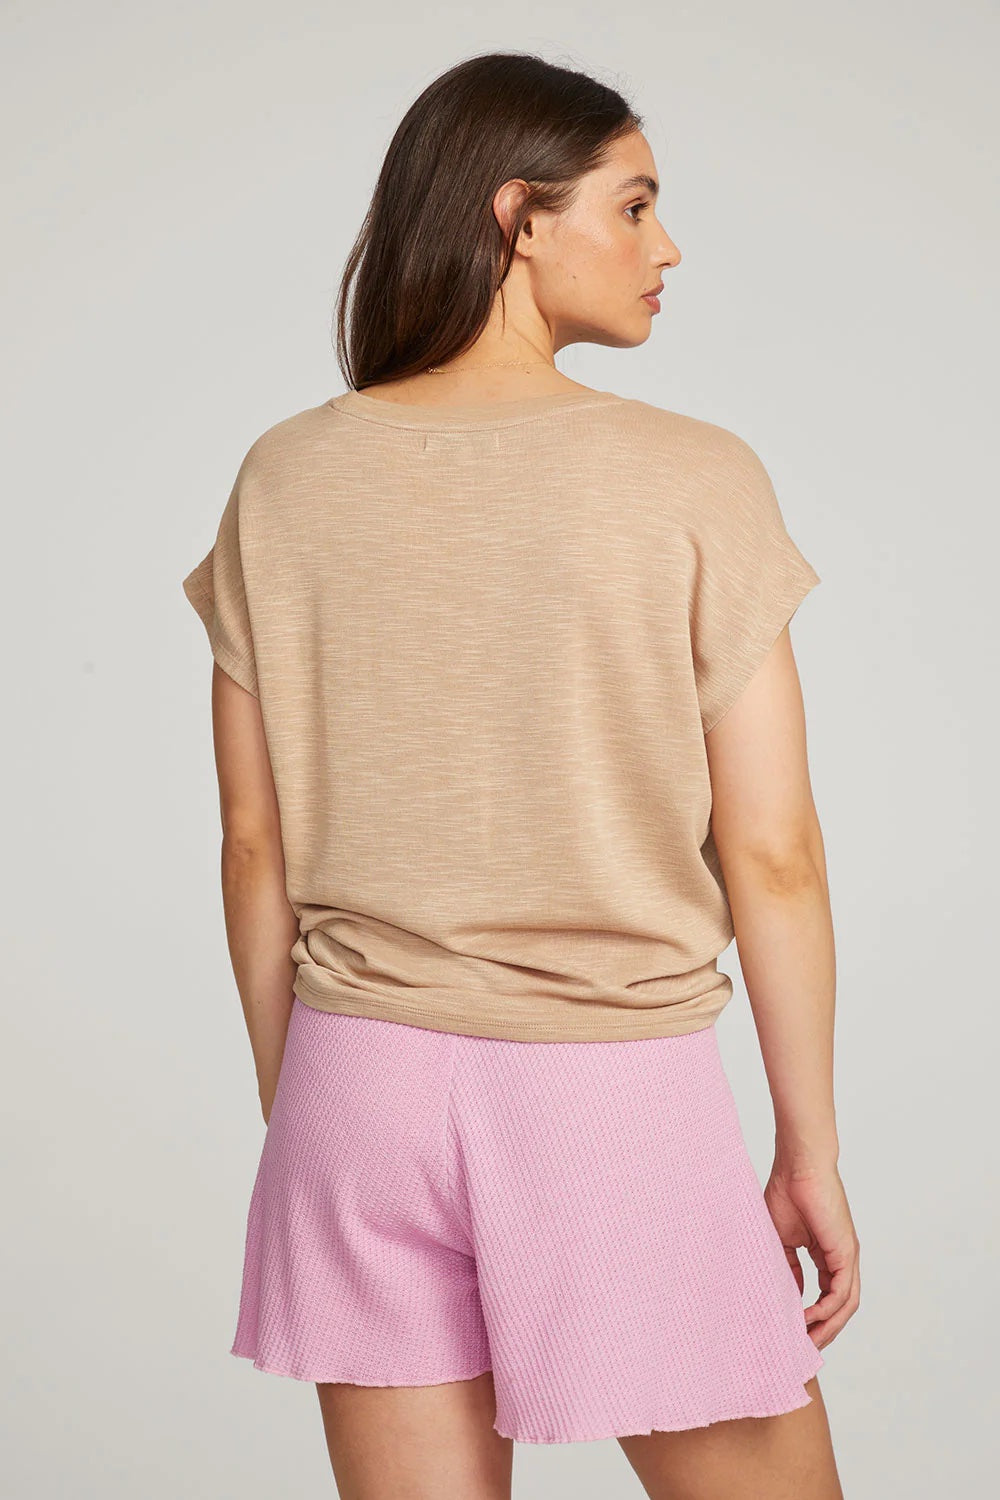 Chaser Wylie Portabella Tee